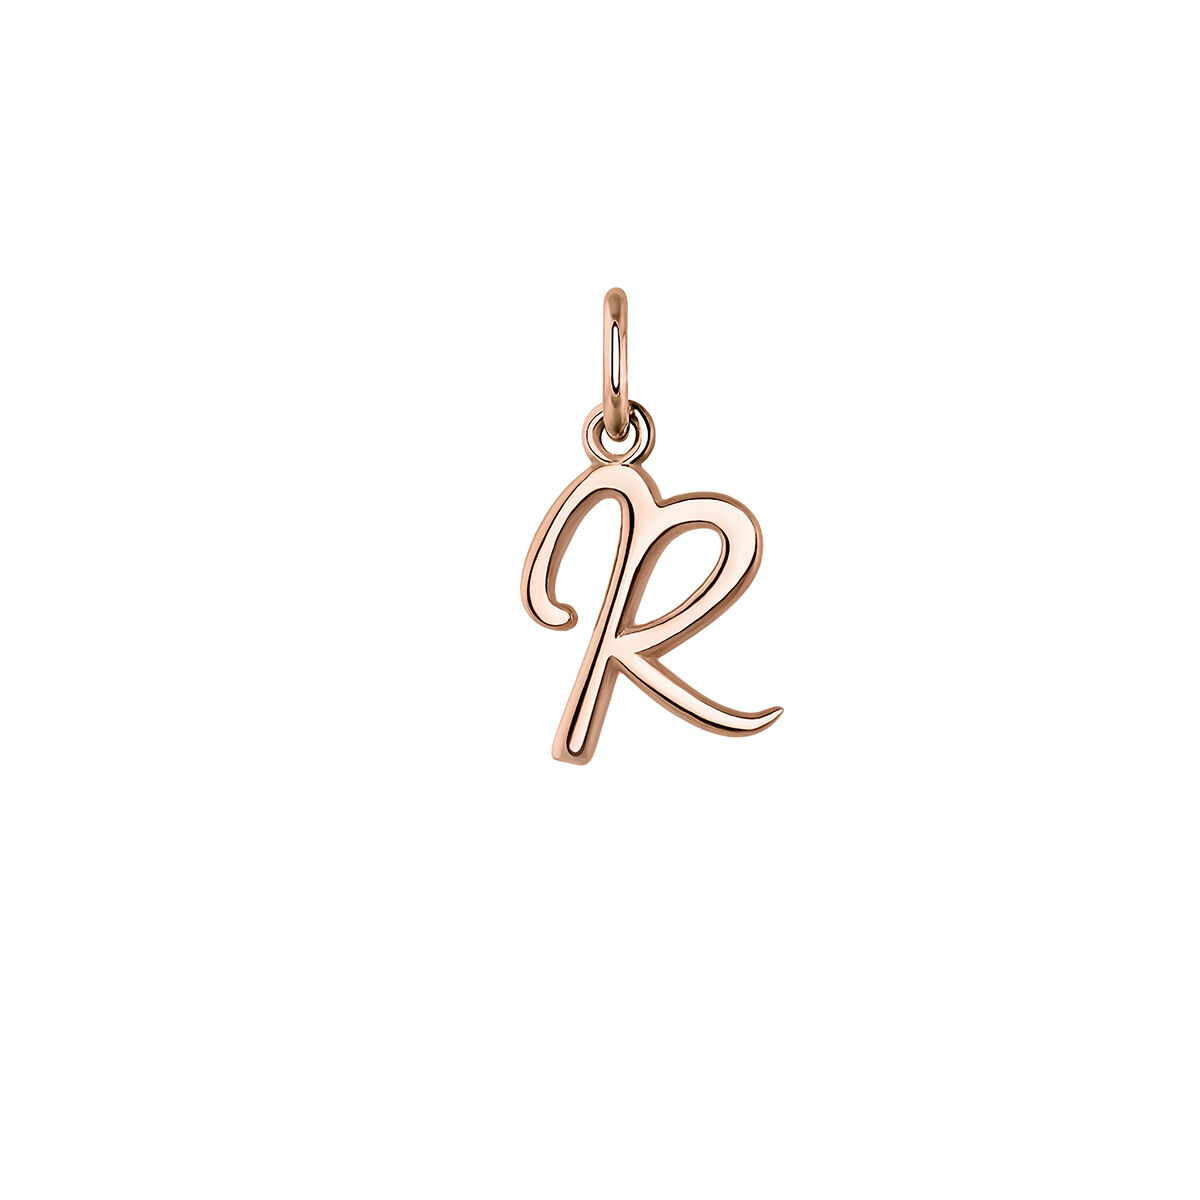 Rose gold-plated silver R initial charm  , J03932-03-R, hi-res